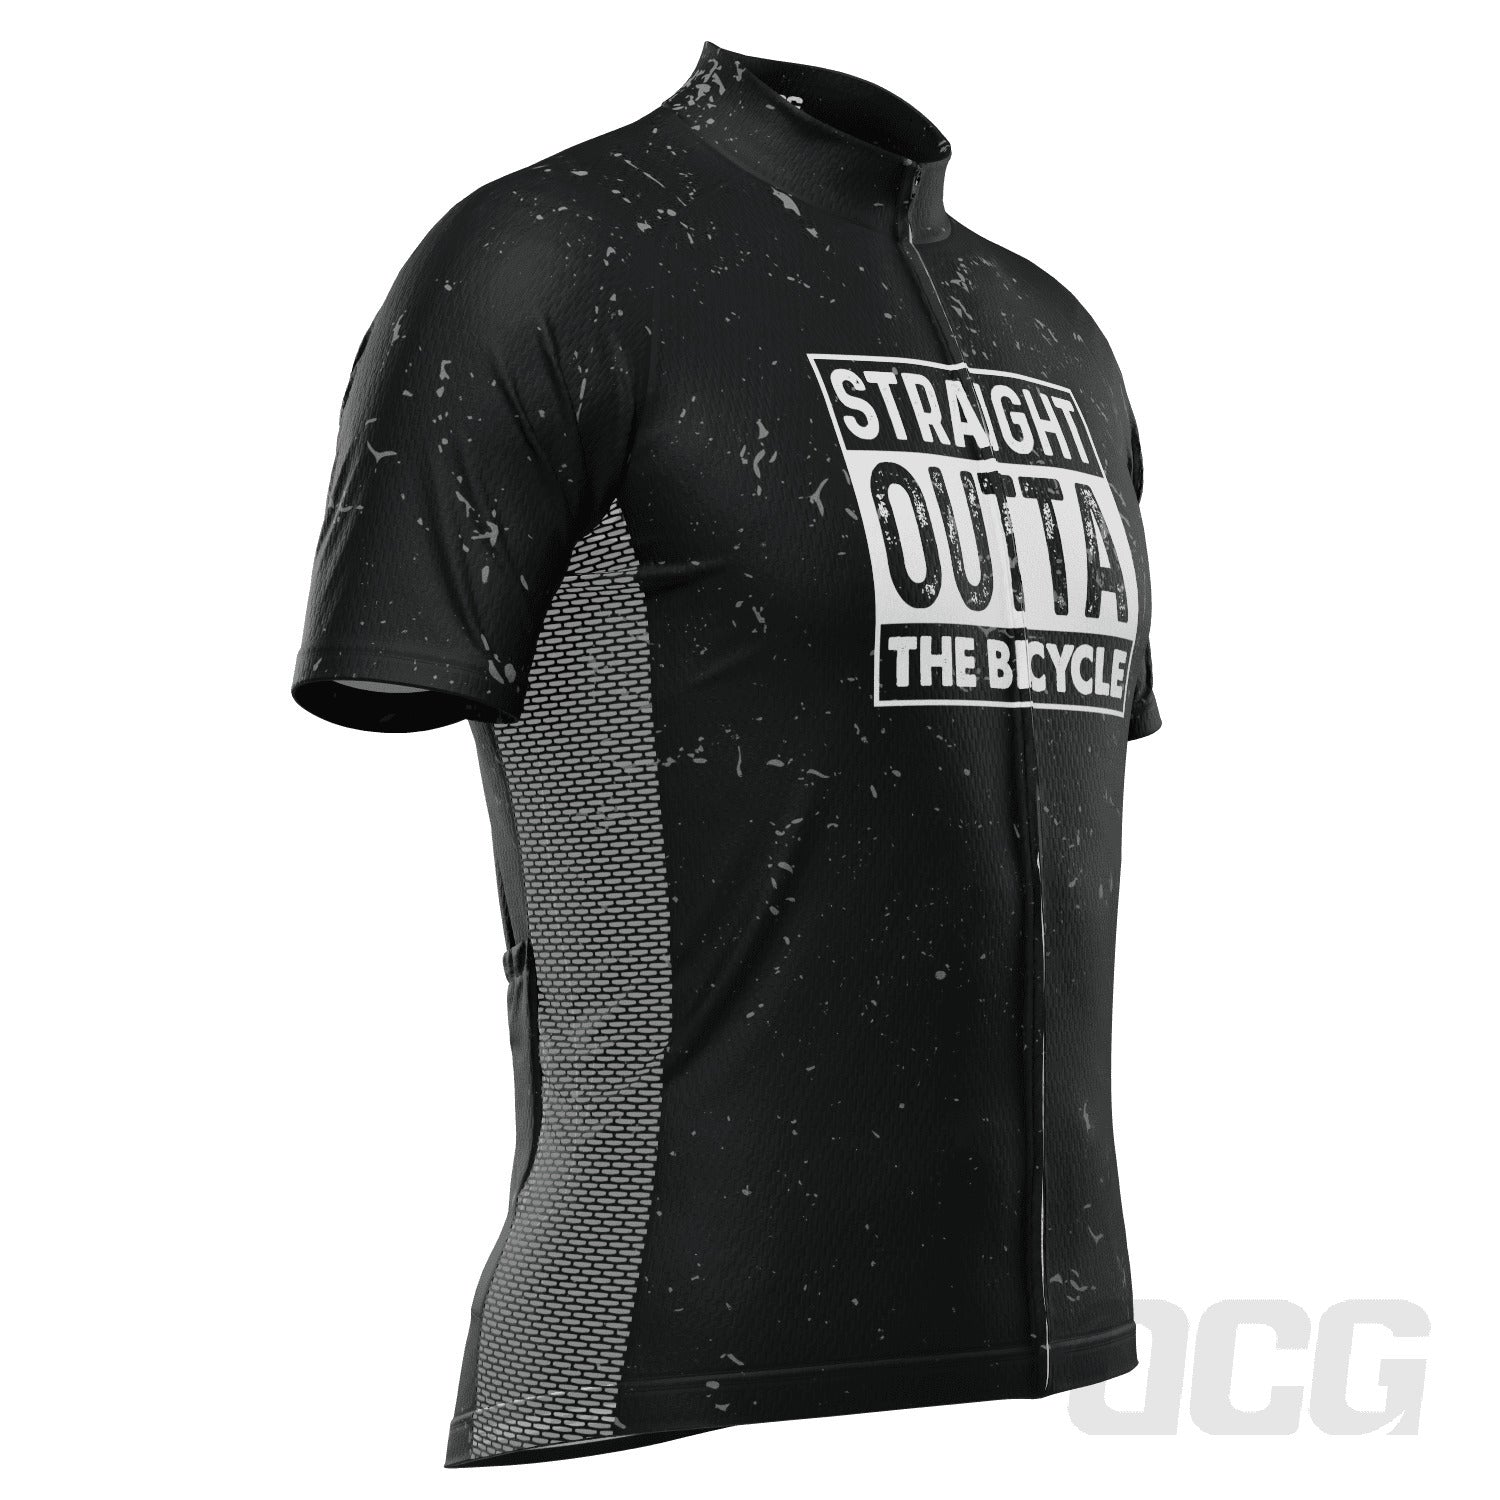 Men's Straight Outta The Bicycle Short Sleeve Cycling Jersey